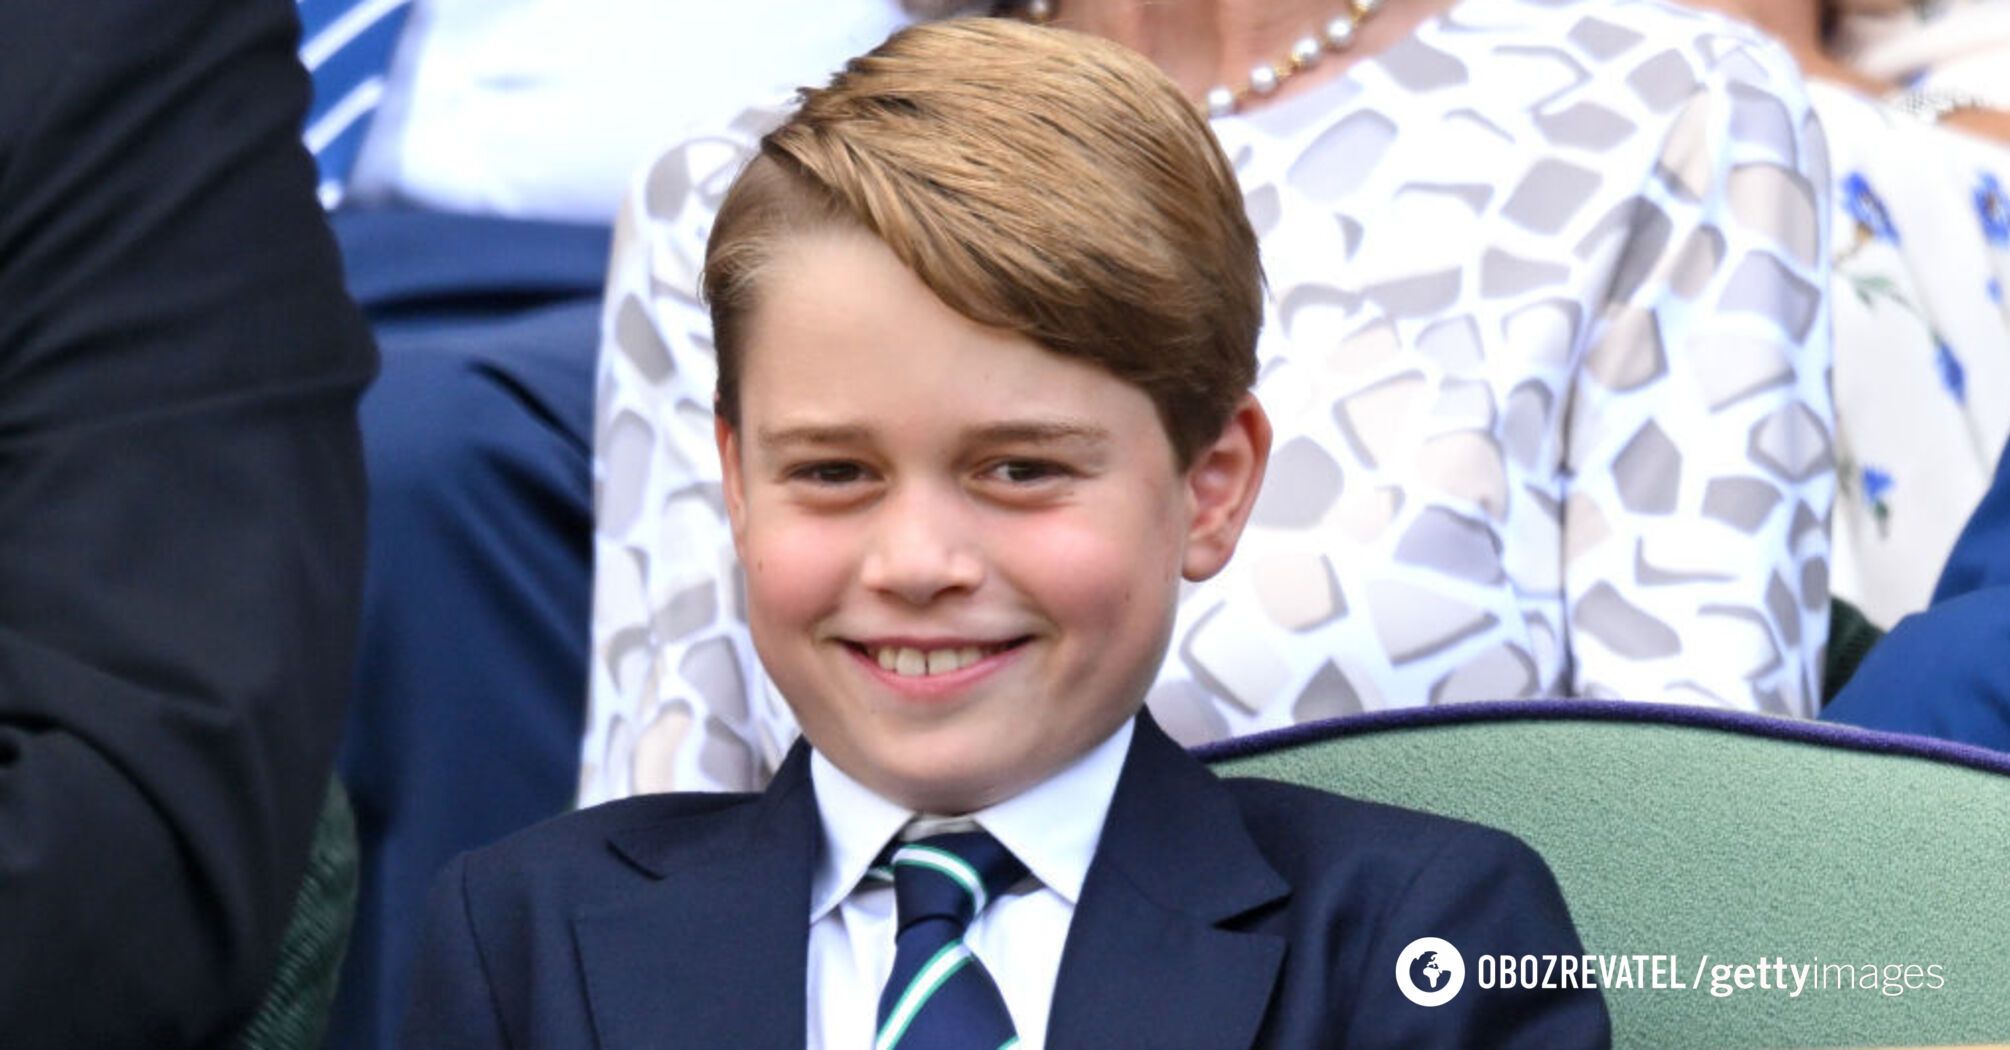 Prince George is advised to follow one important rule to become future king: it will come into effect one year from now